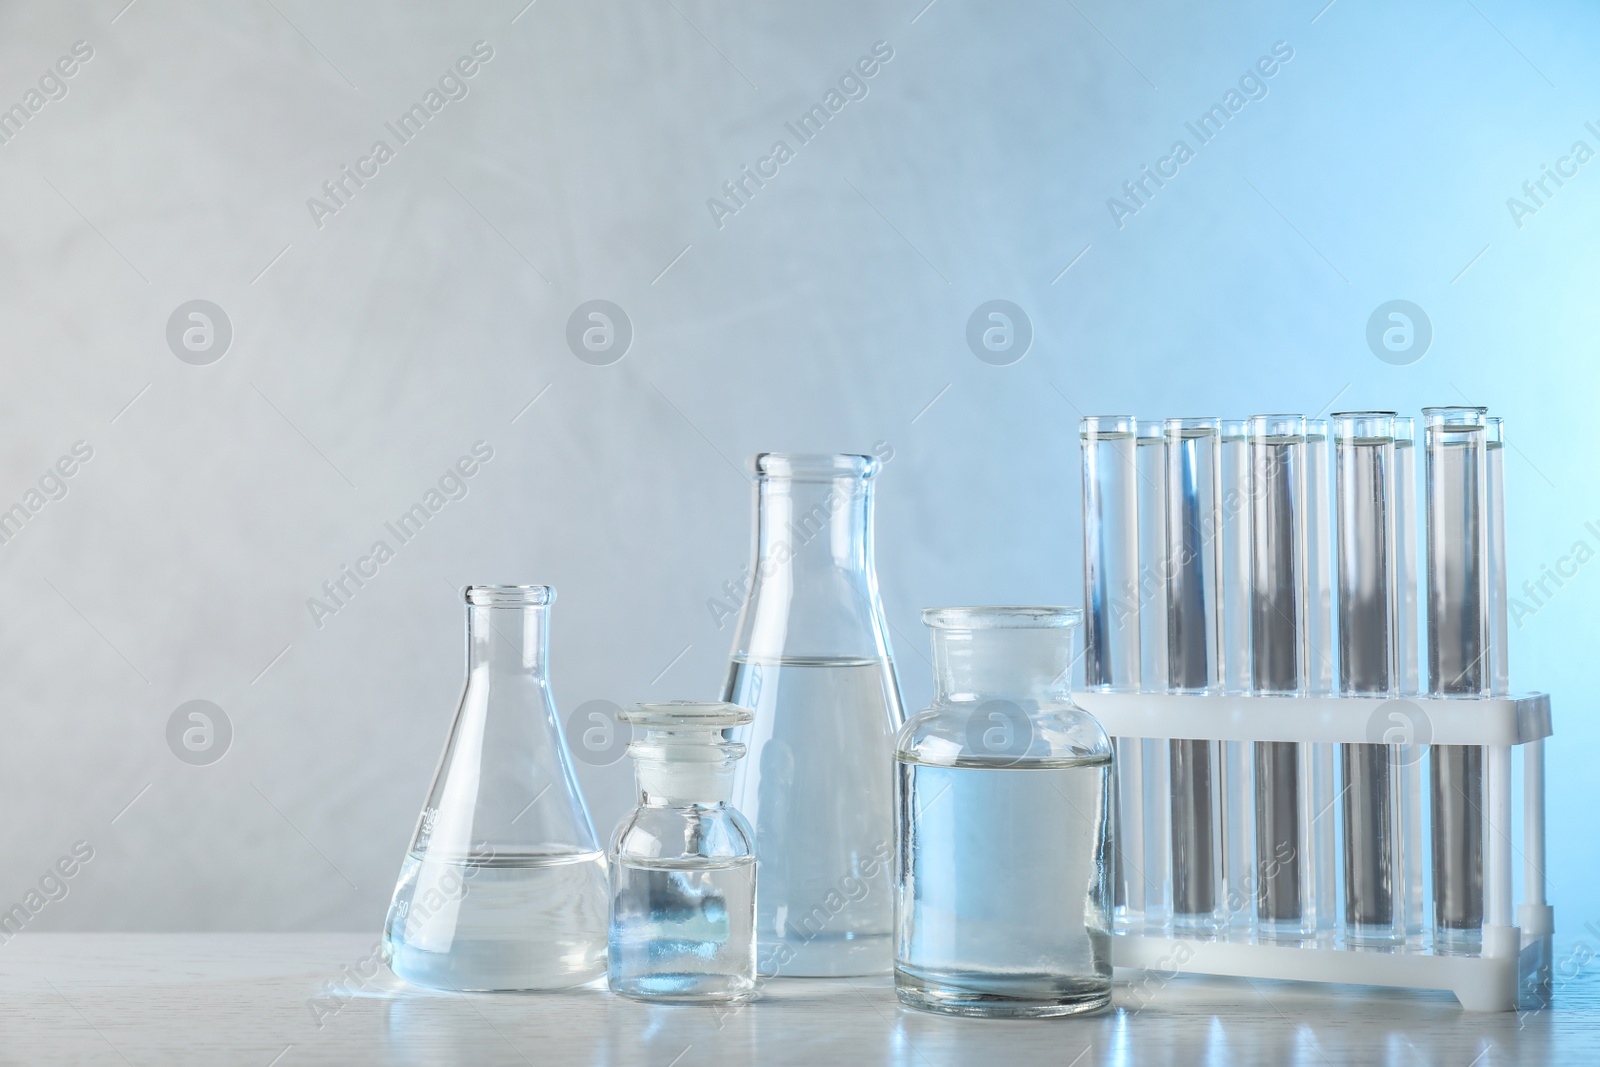 Photo of Laboratory glassware with liquid samples for analysis on table against toned blue background